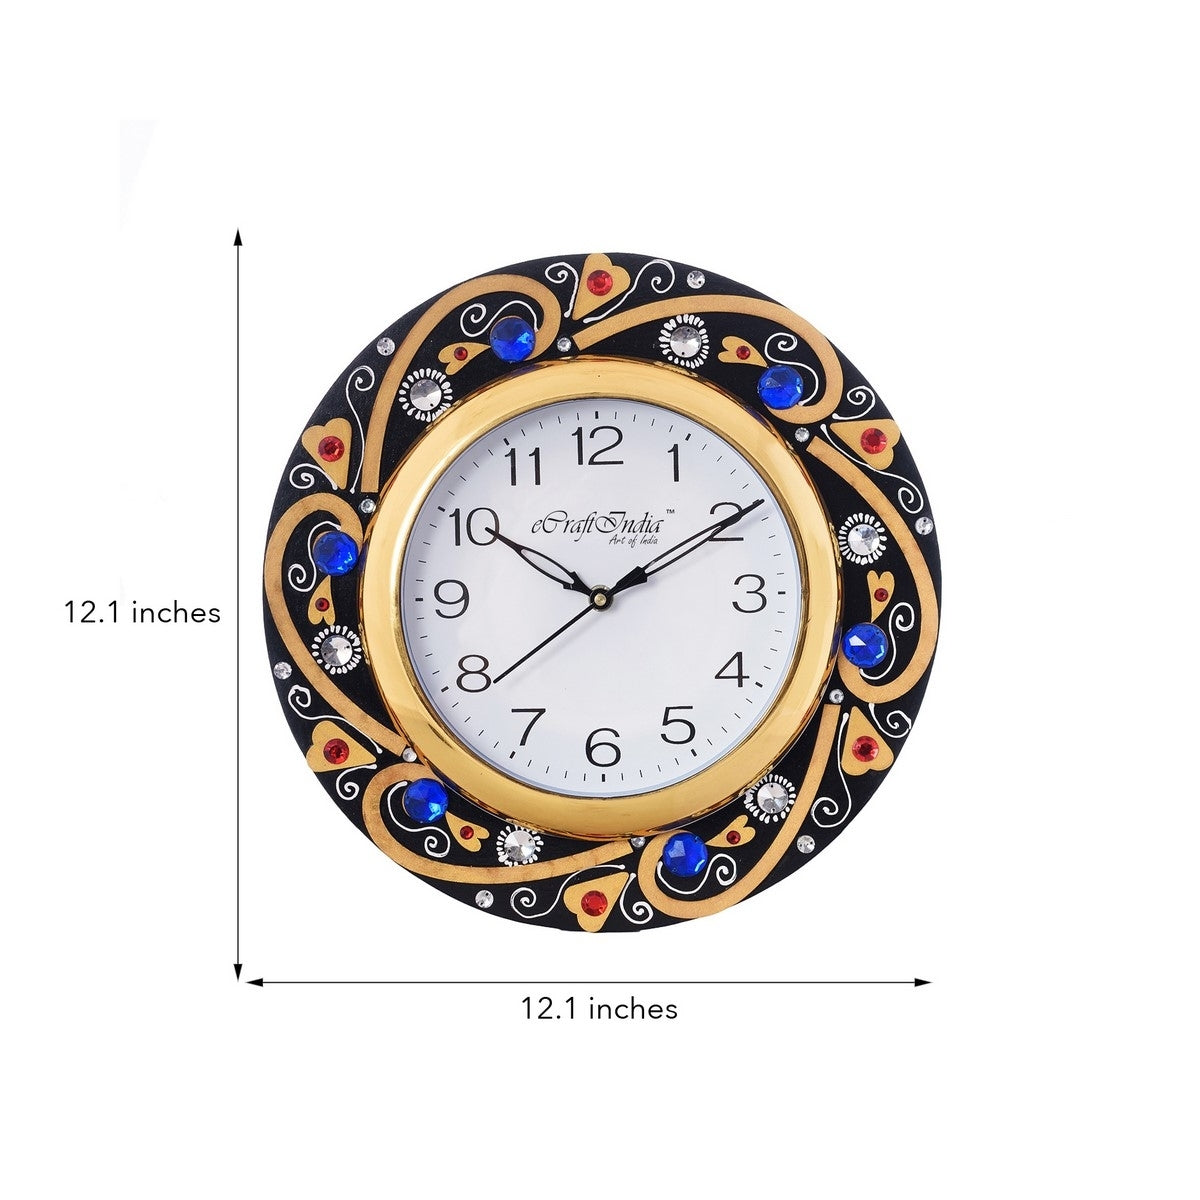 Crystal Studded Decorative Handicrafted Round Shape Papier-Mache Wooden Wall Clock 2